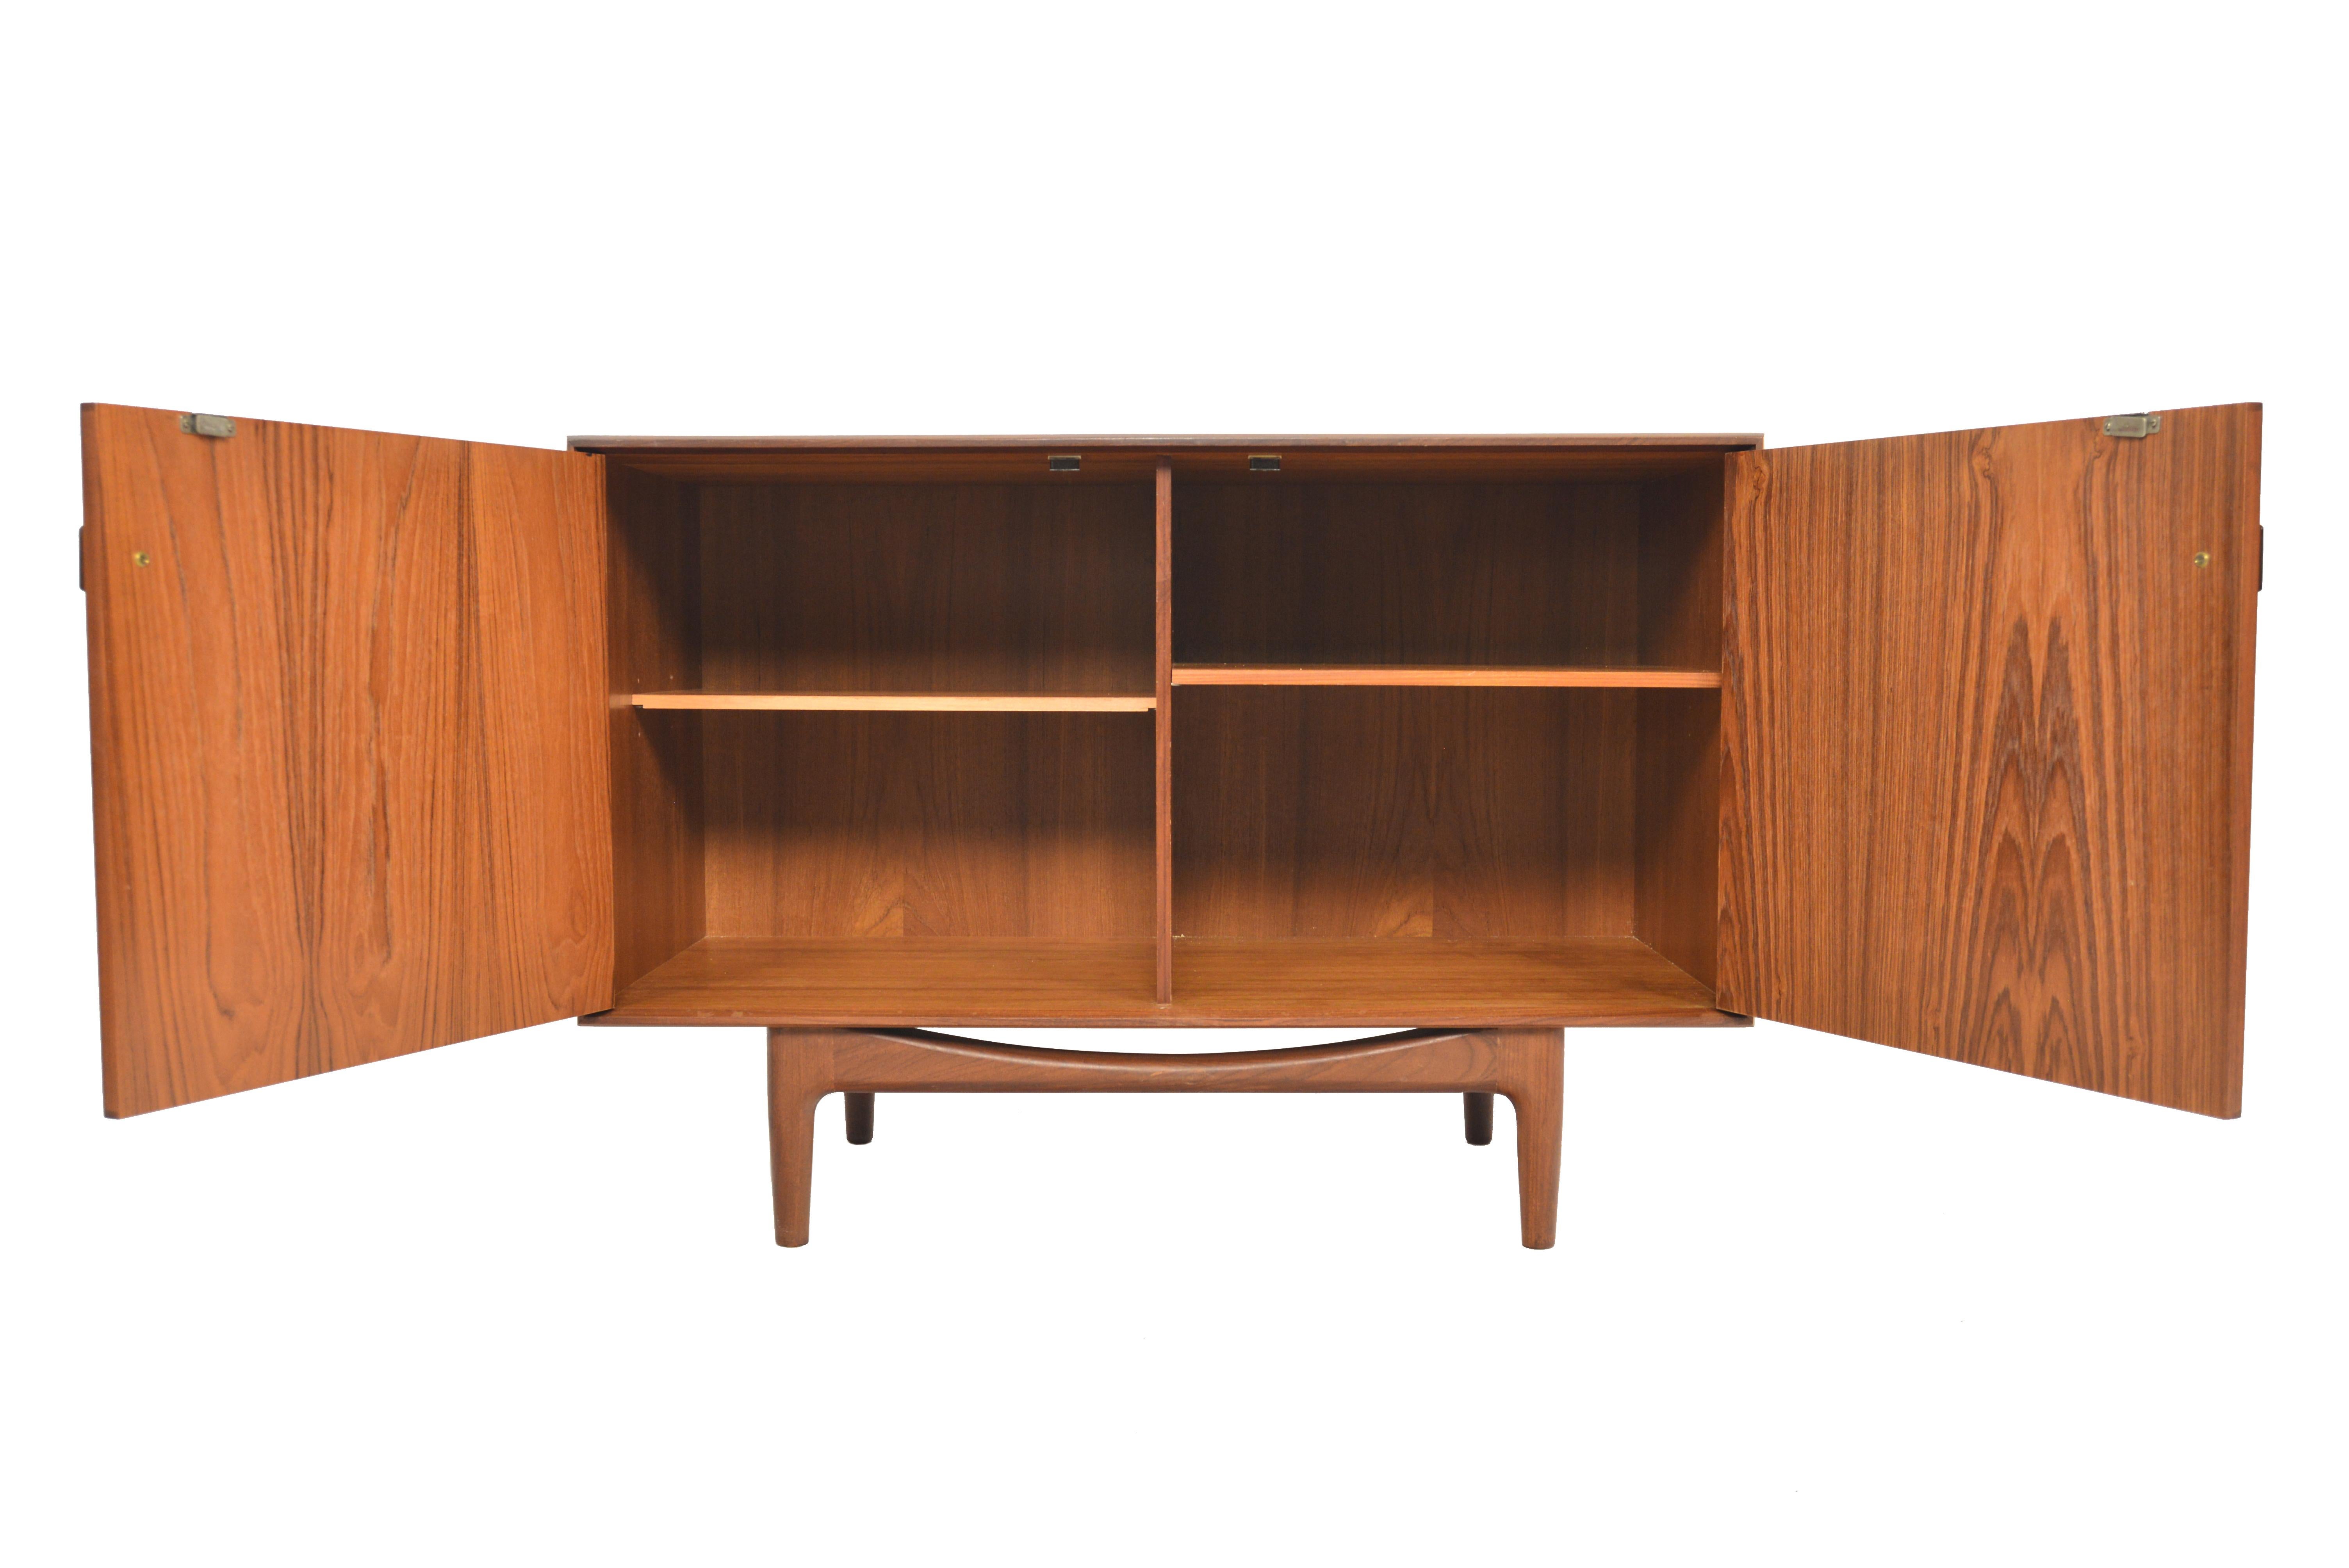 This small midcentury teak credenza was designed by Ib Kofod Larsen for G Plan in 1961 for the Danish Range. Crafted in teak and afrormosia with handsomely refined lines, two wide doors open to reveal two bays with adjustable shelving. Finished on